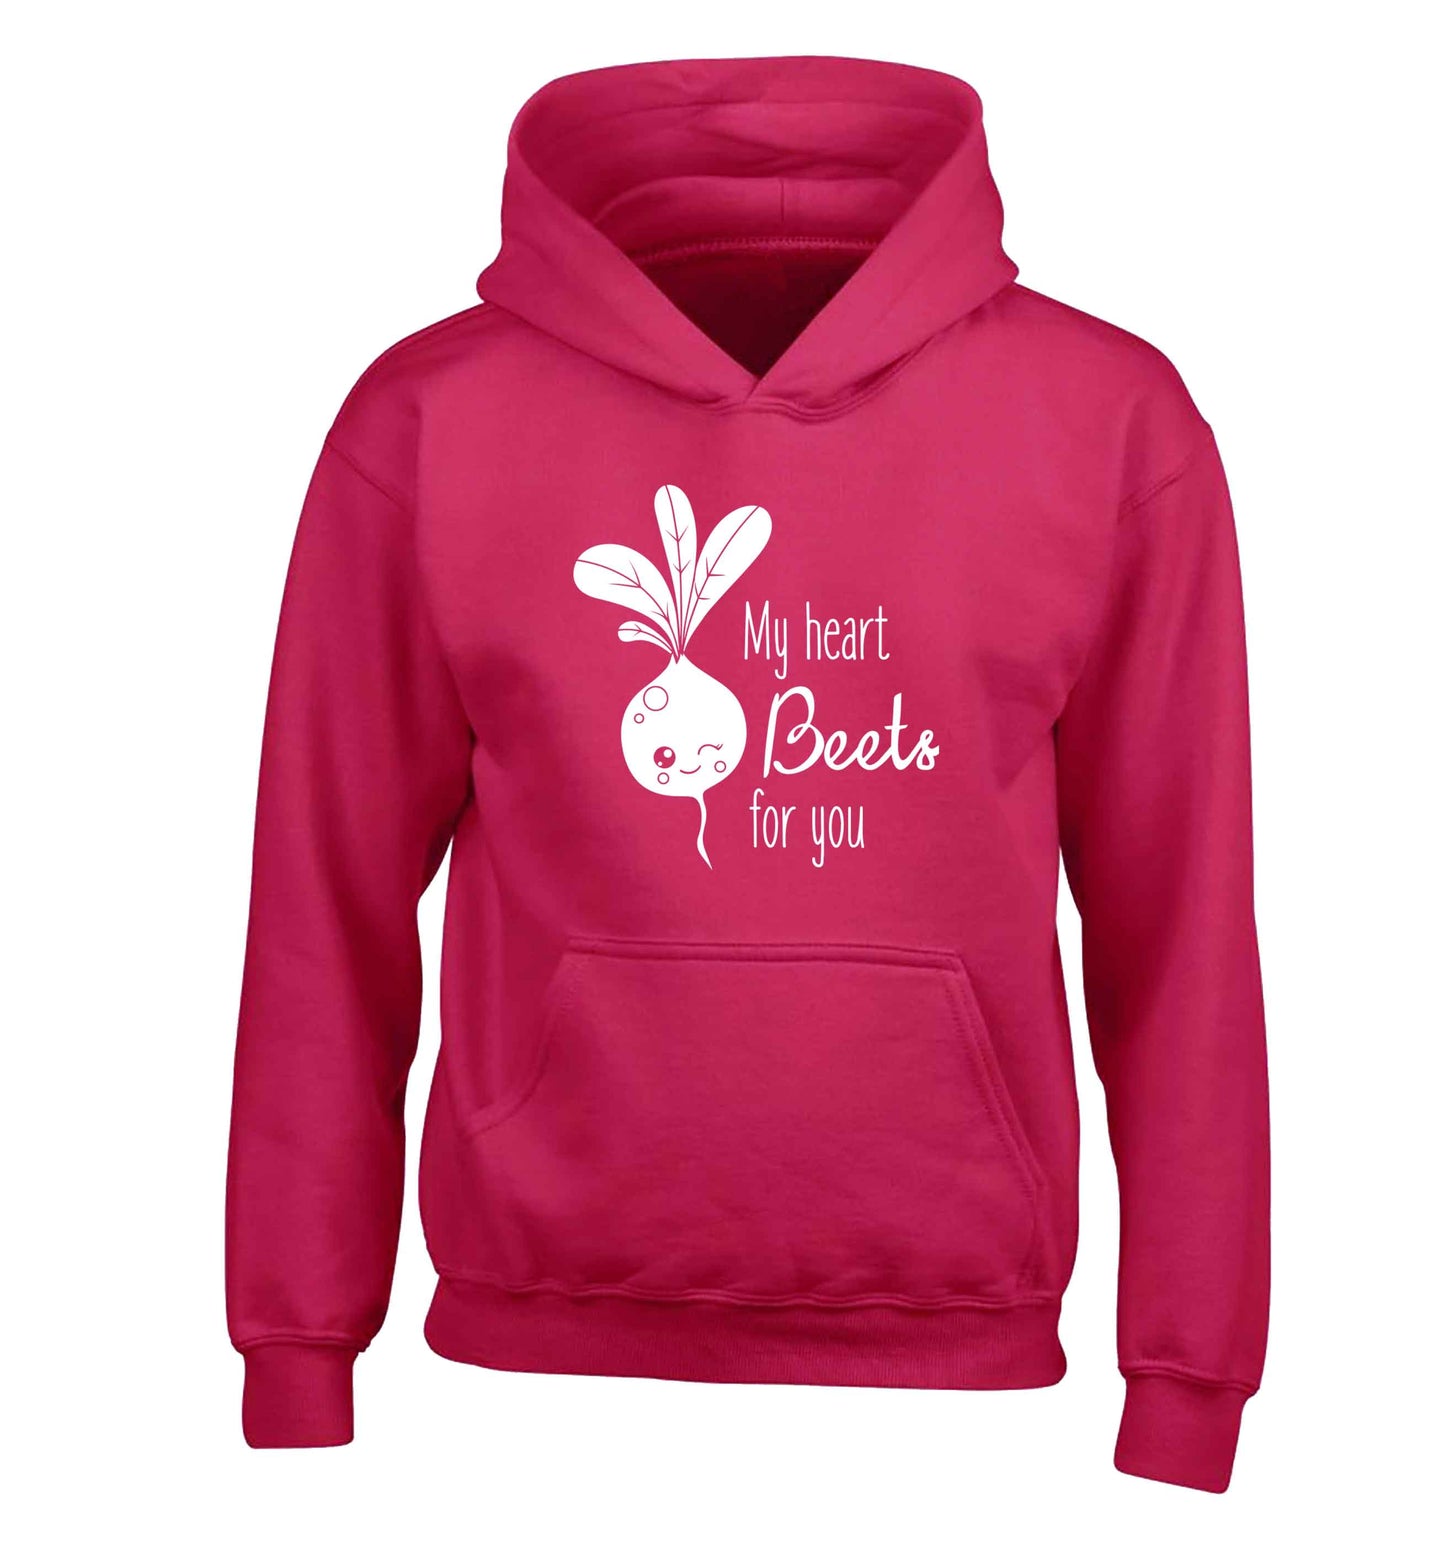 My heart beets for you children's pink hoodie 12-13 Years